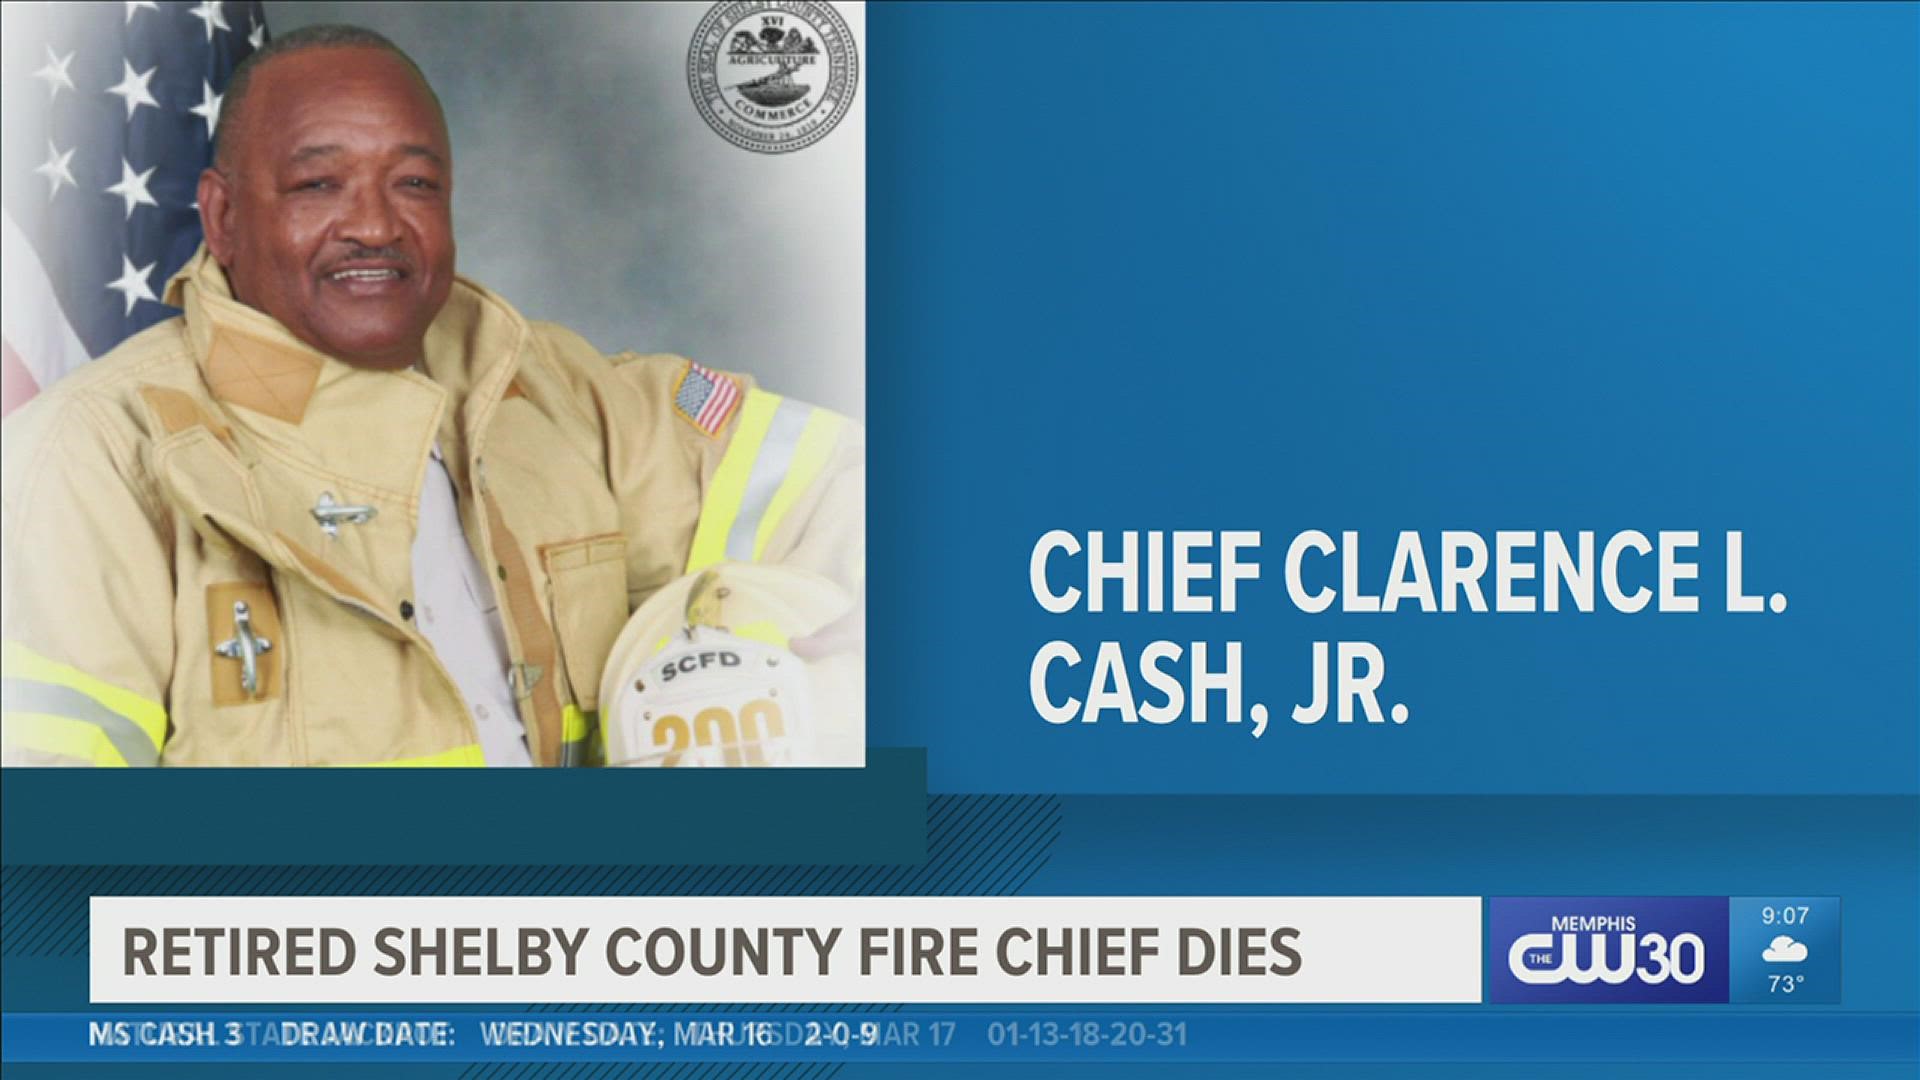 In addition to serving with the Shelby County Fire Department, Clarence L. Cash Jr. was a member of the Shelby County 911 Board.